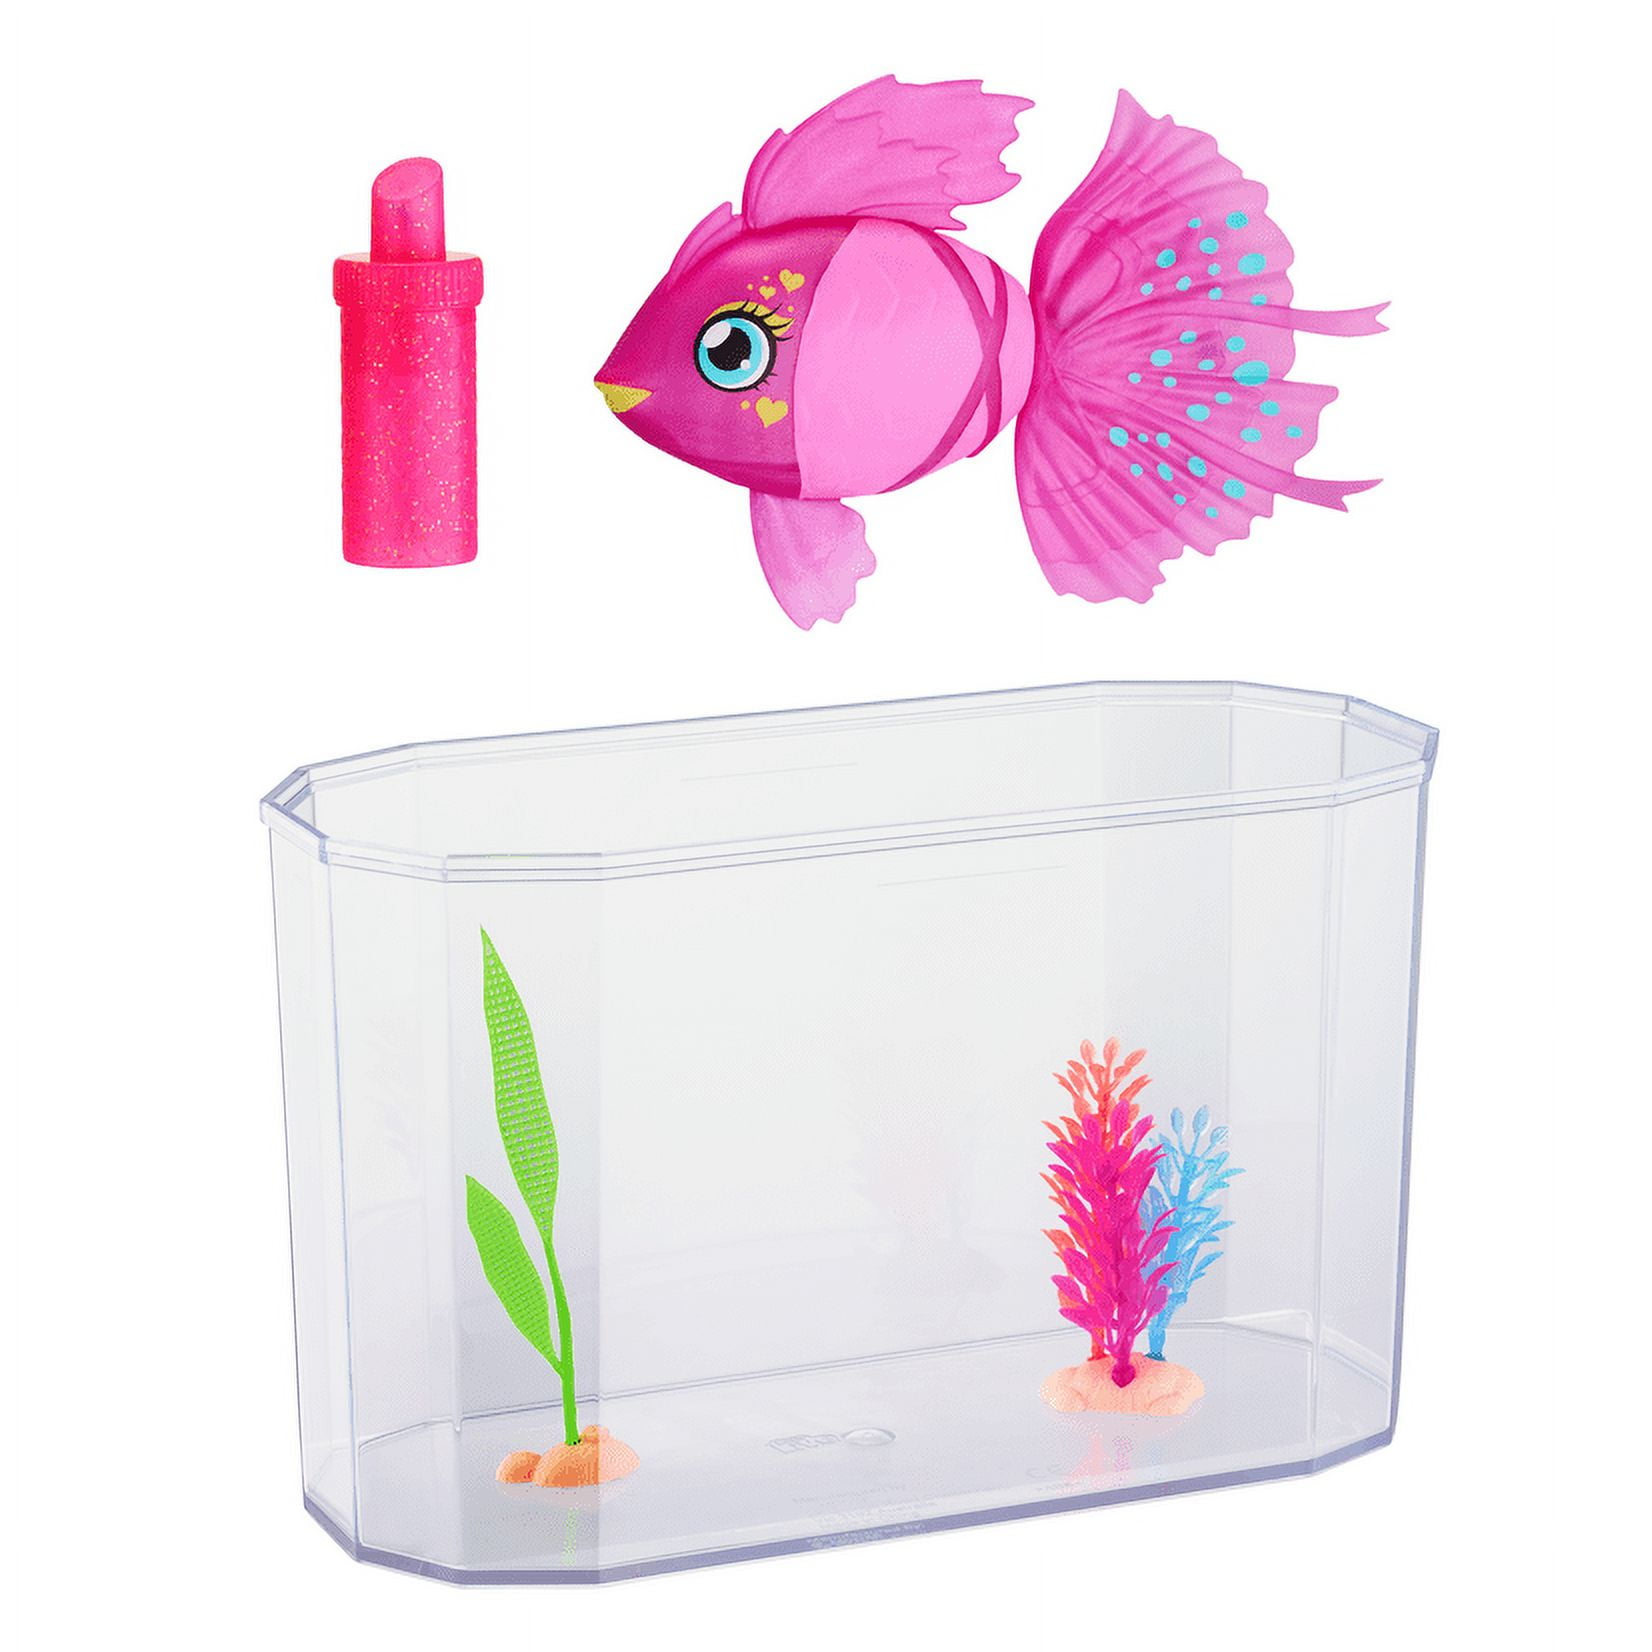 Little Live Pets - Lil Dippers Fish Tank - Interactive Toy Fish & Tank ,  MagicAlly Comes Alive In Water, Feed and SWims like A Real Fish